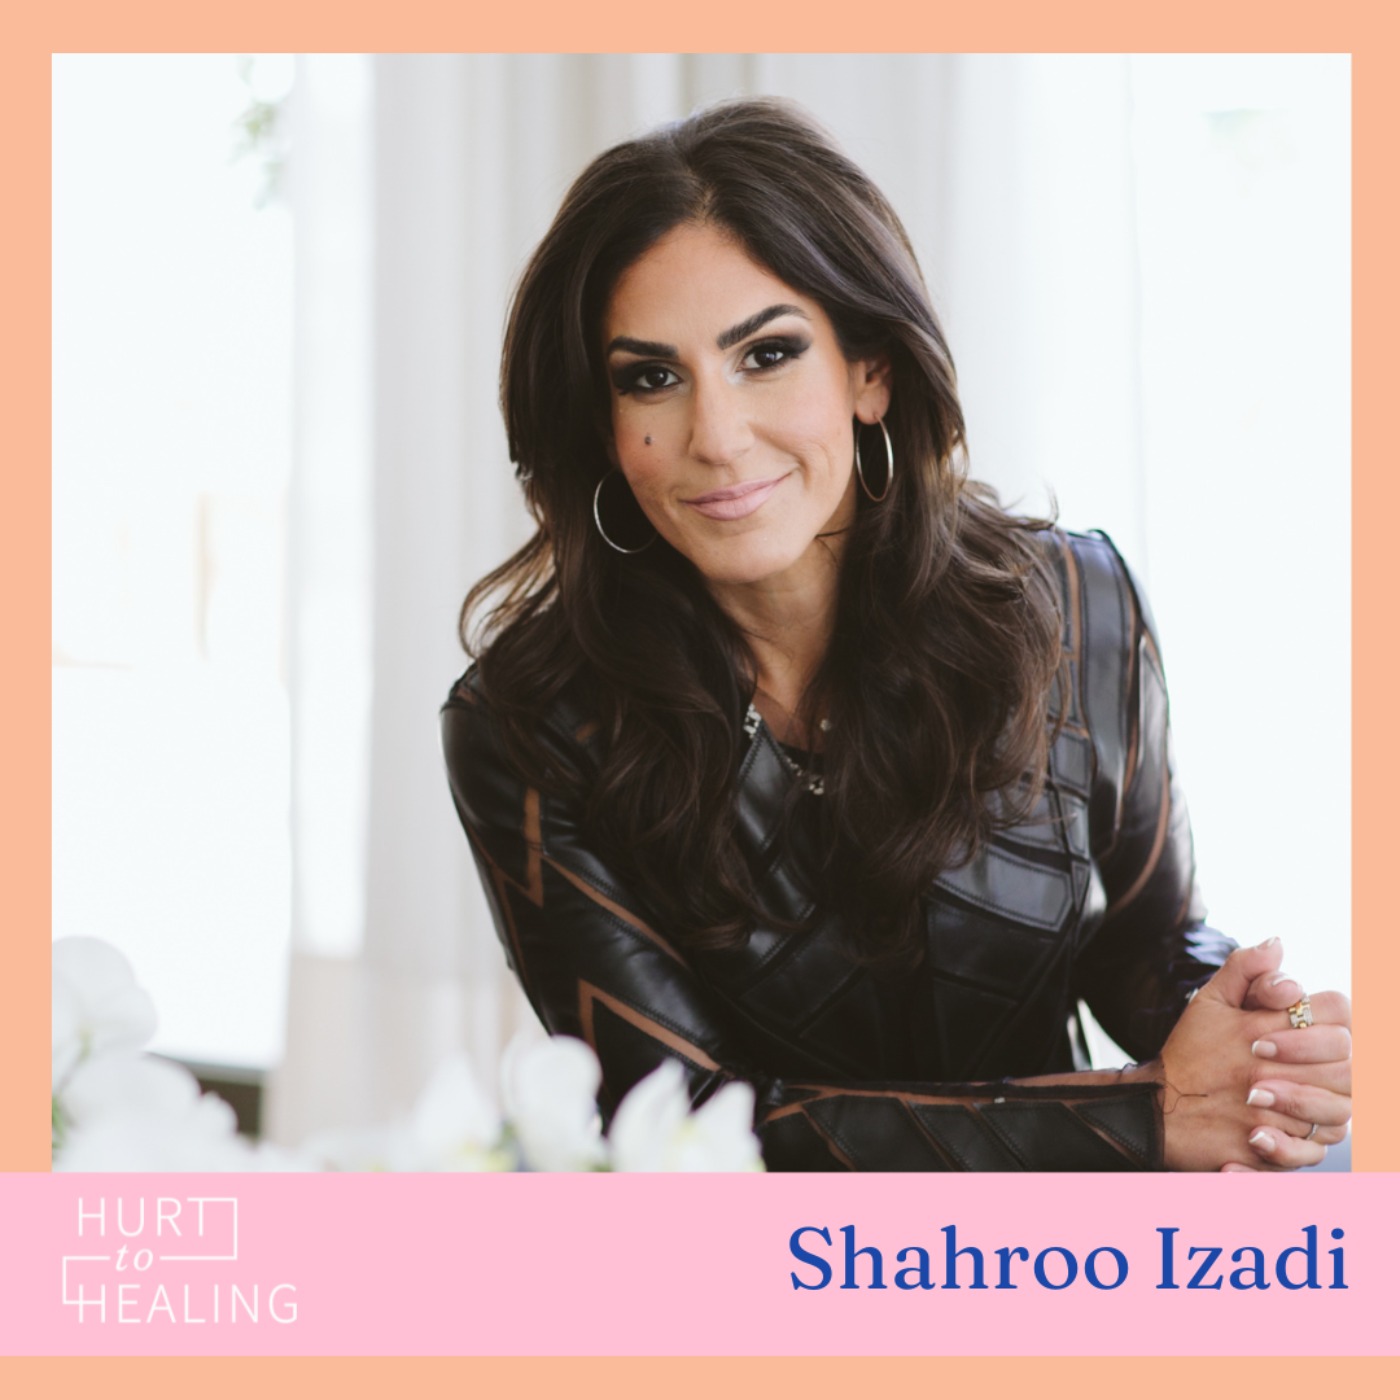 Shahroo Izadi on changing habits by being kinder to yourself